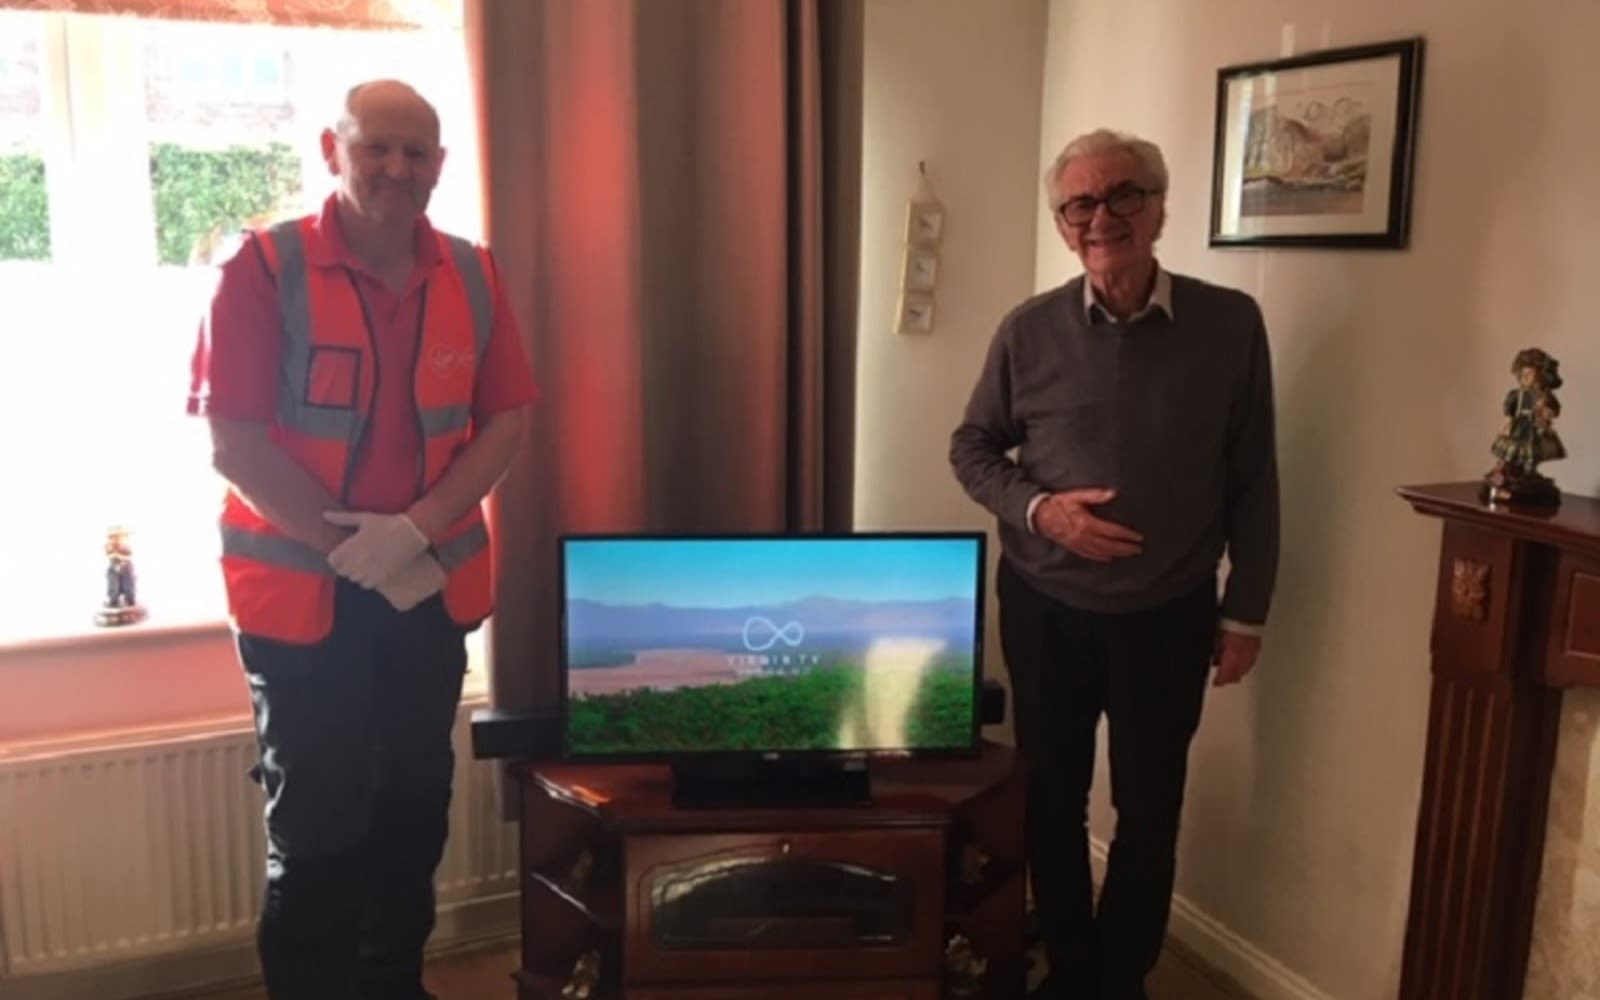 Virgin Media Employee meets a customer standing next to a television